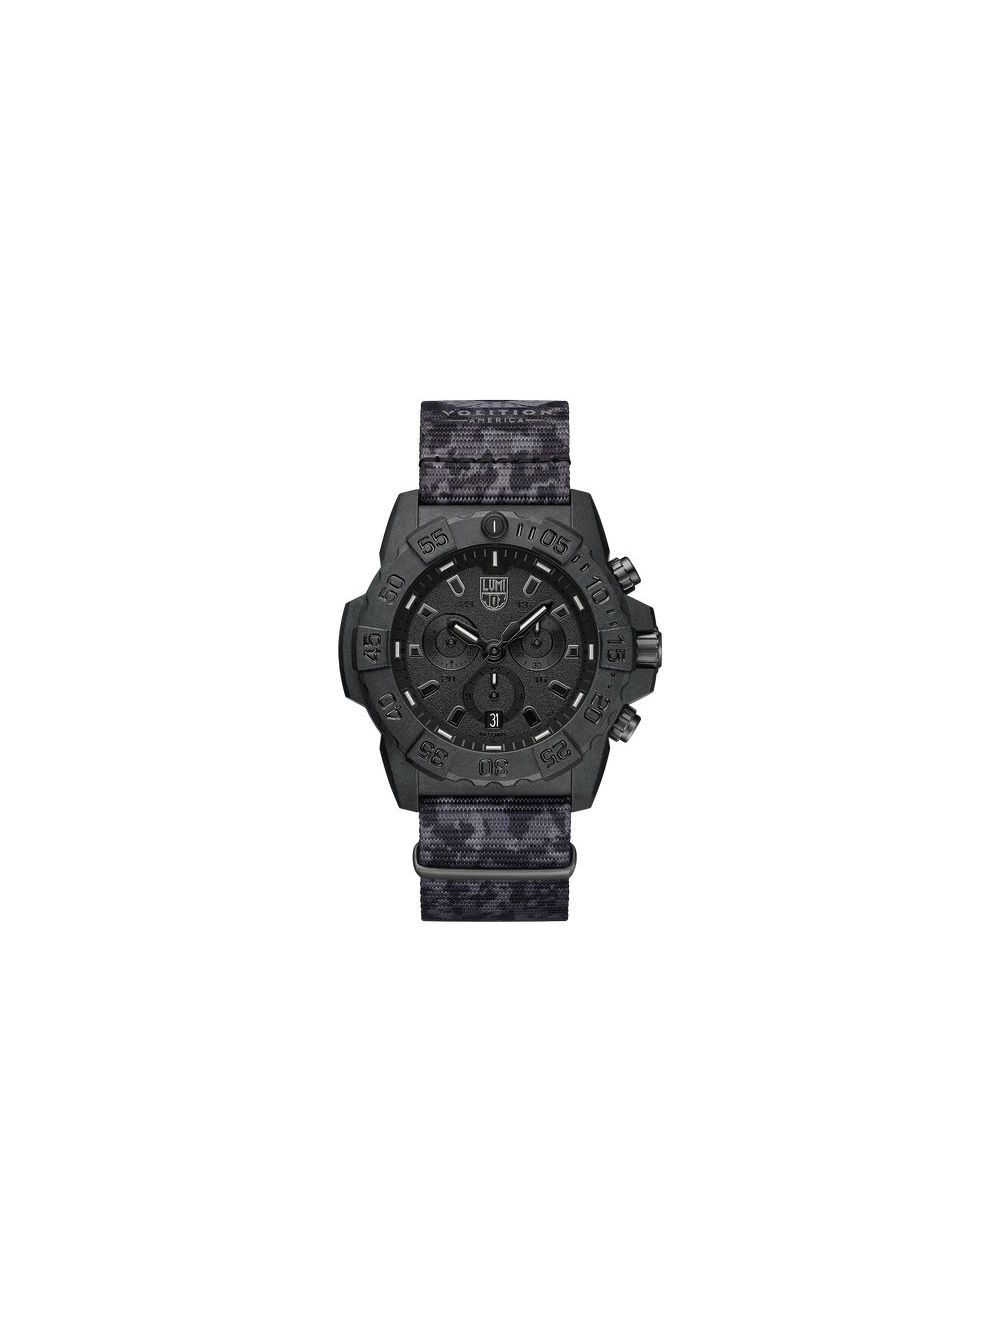 Volition Navy SEAL Chronograph Watch